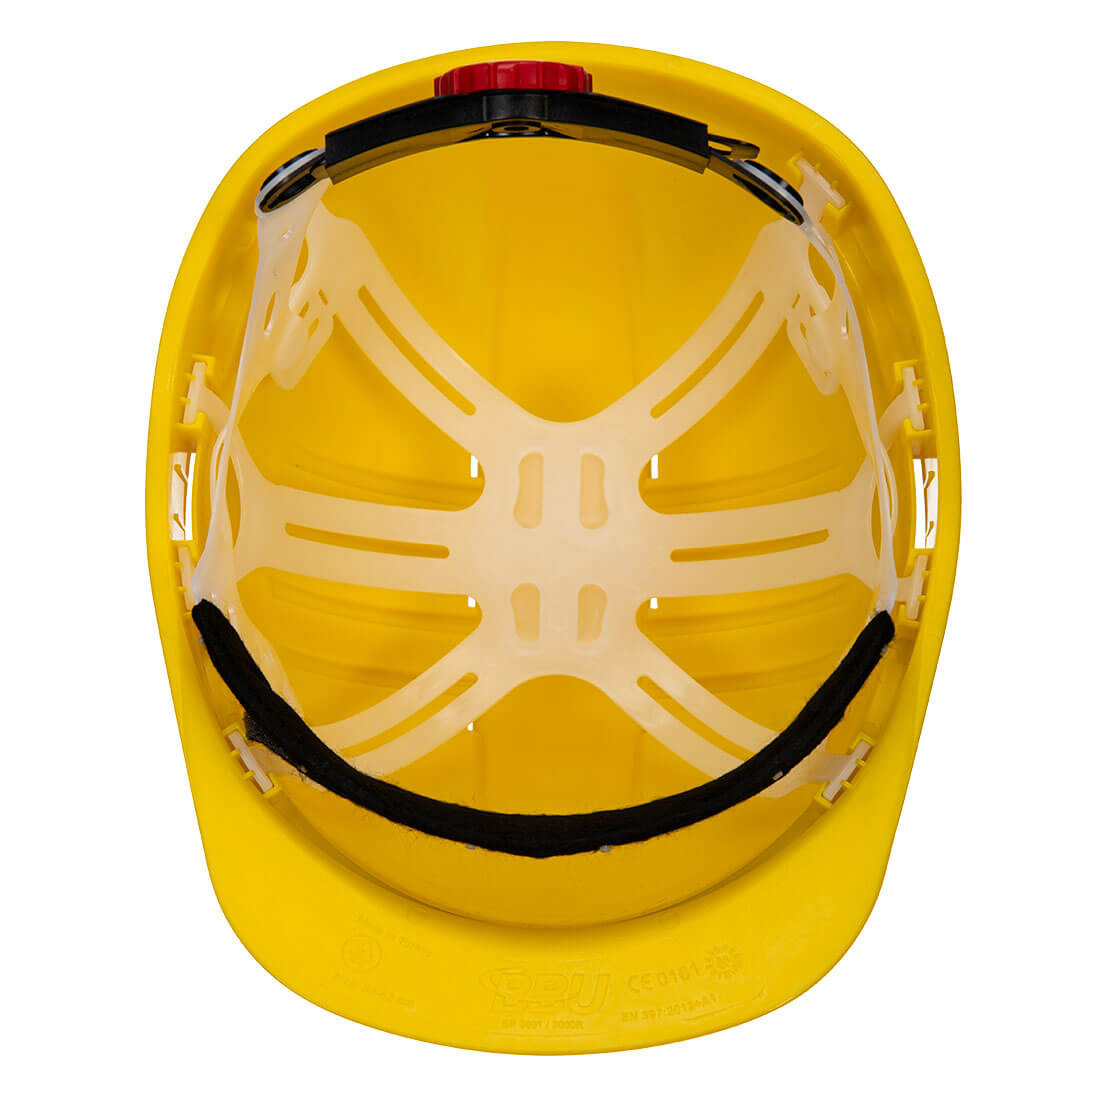 Expertline Safety Helmet - Personal protection